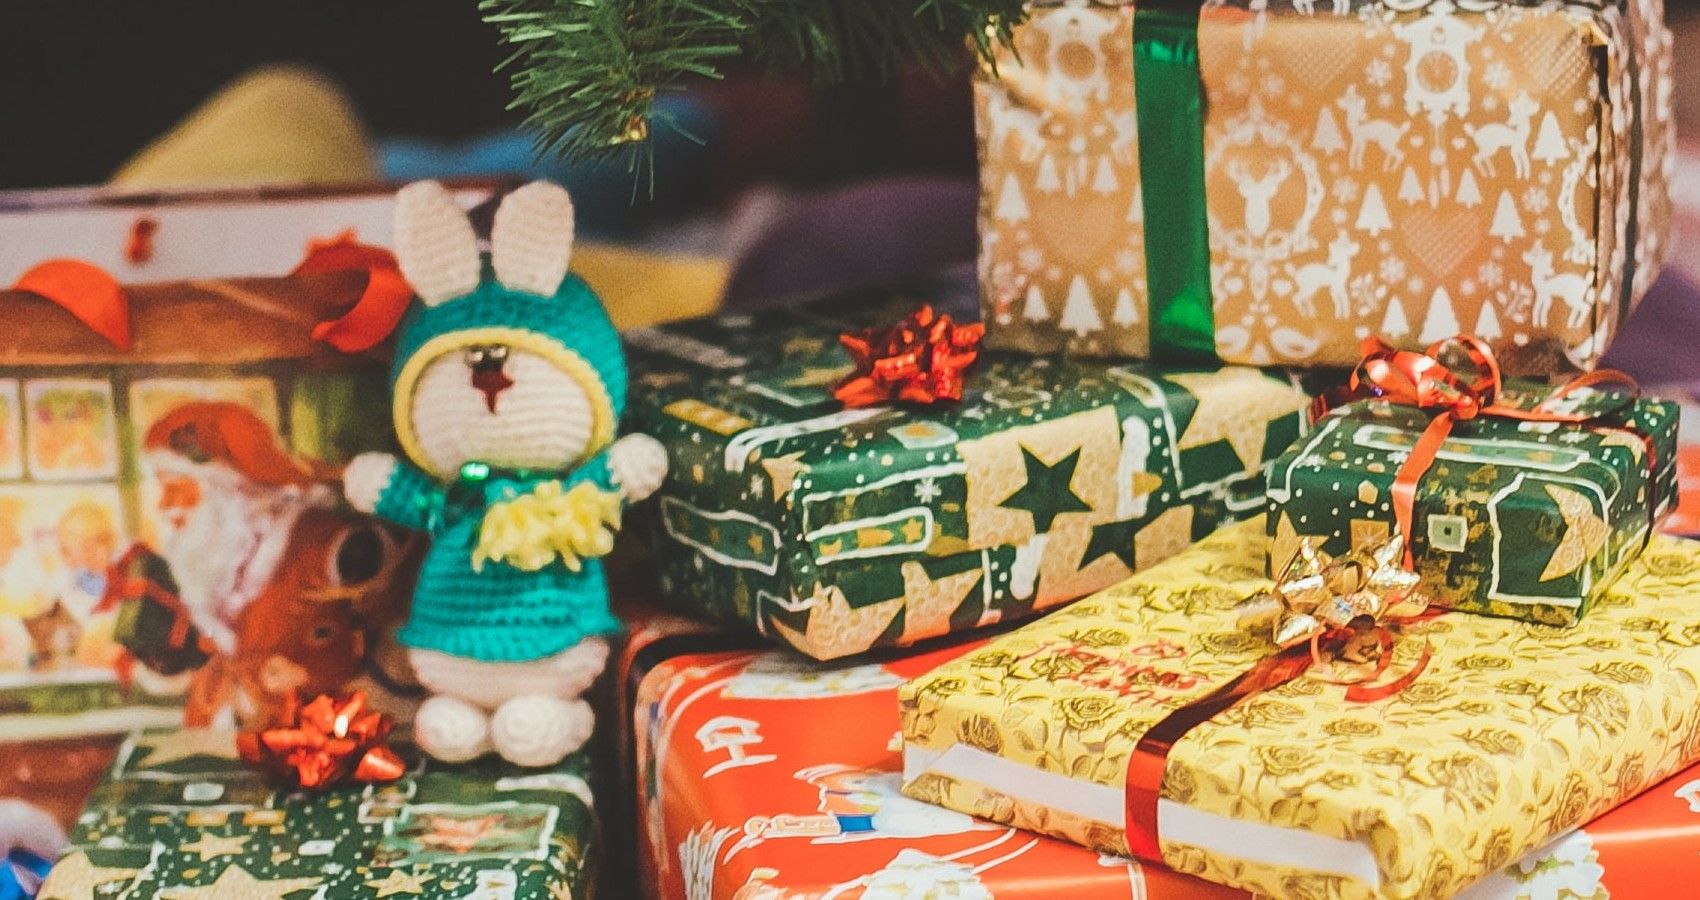 It Turns Out Wrapping Gifts Is The Most Dreaded Holiday Chore